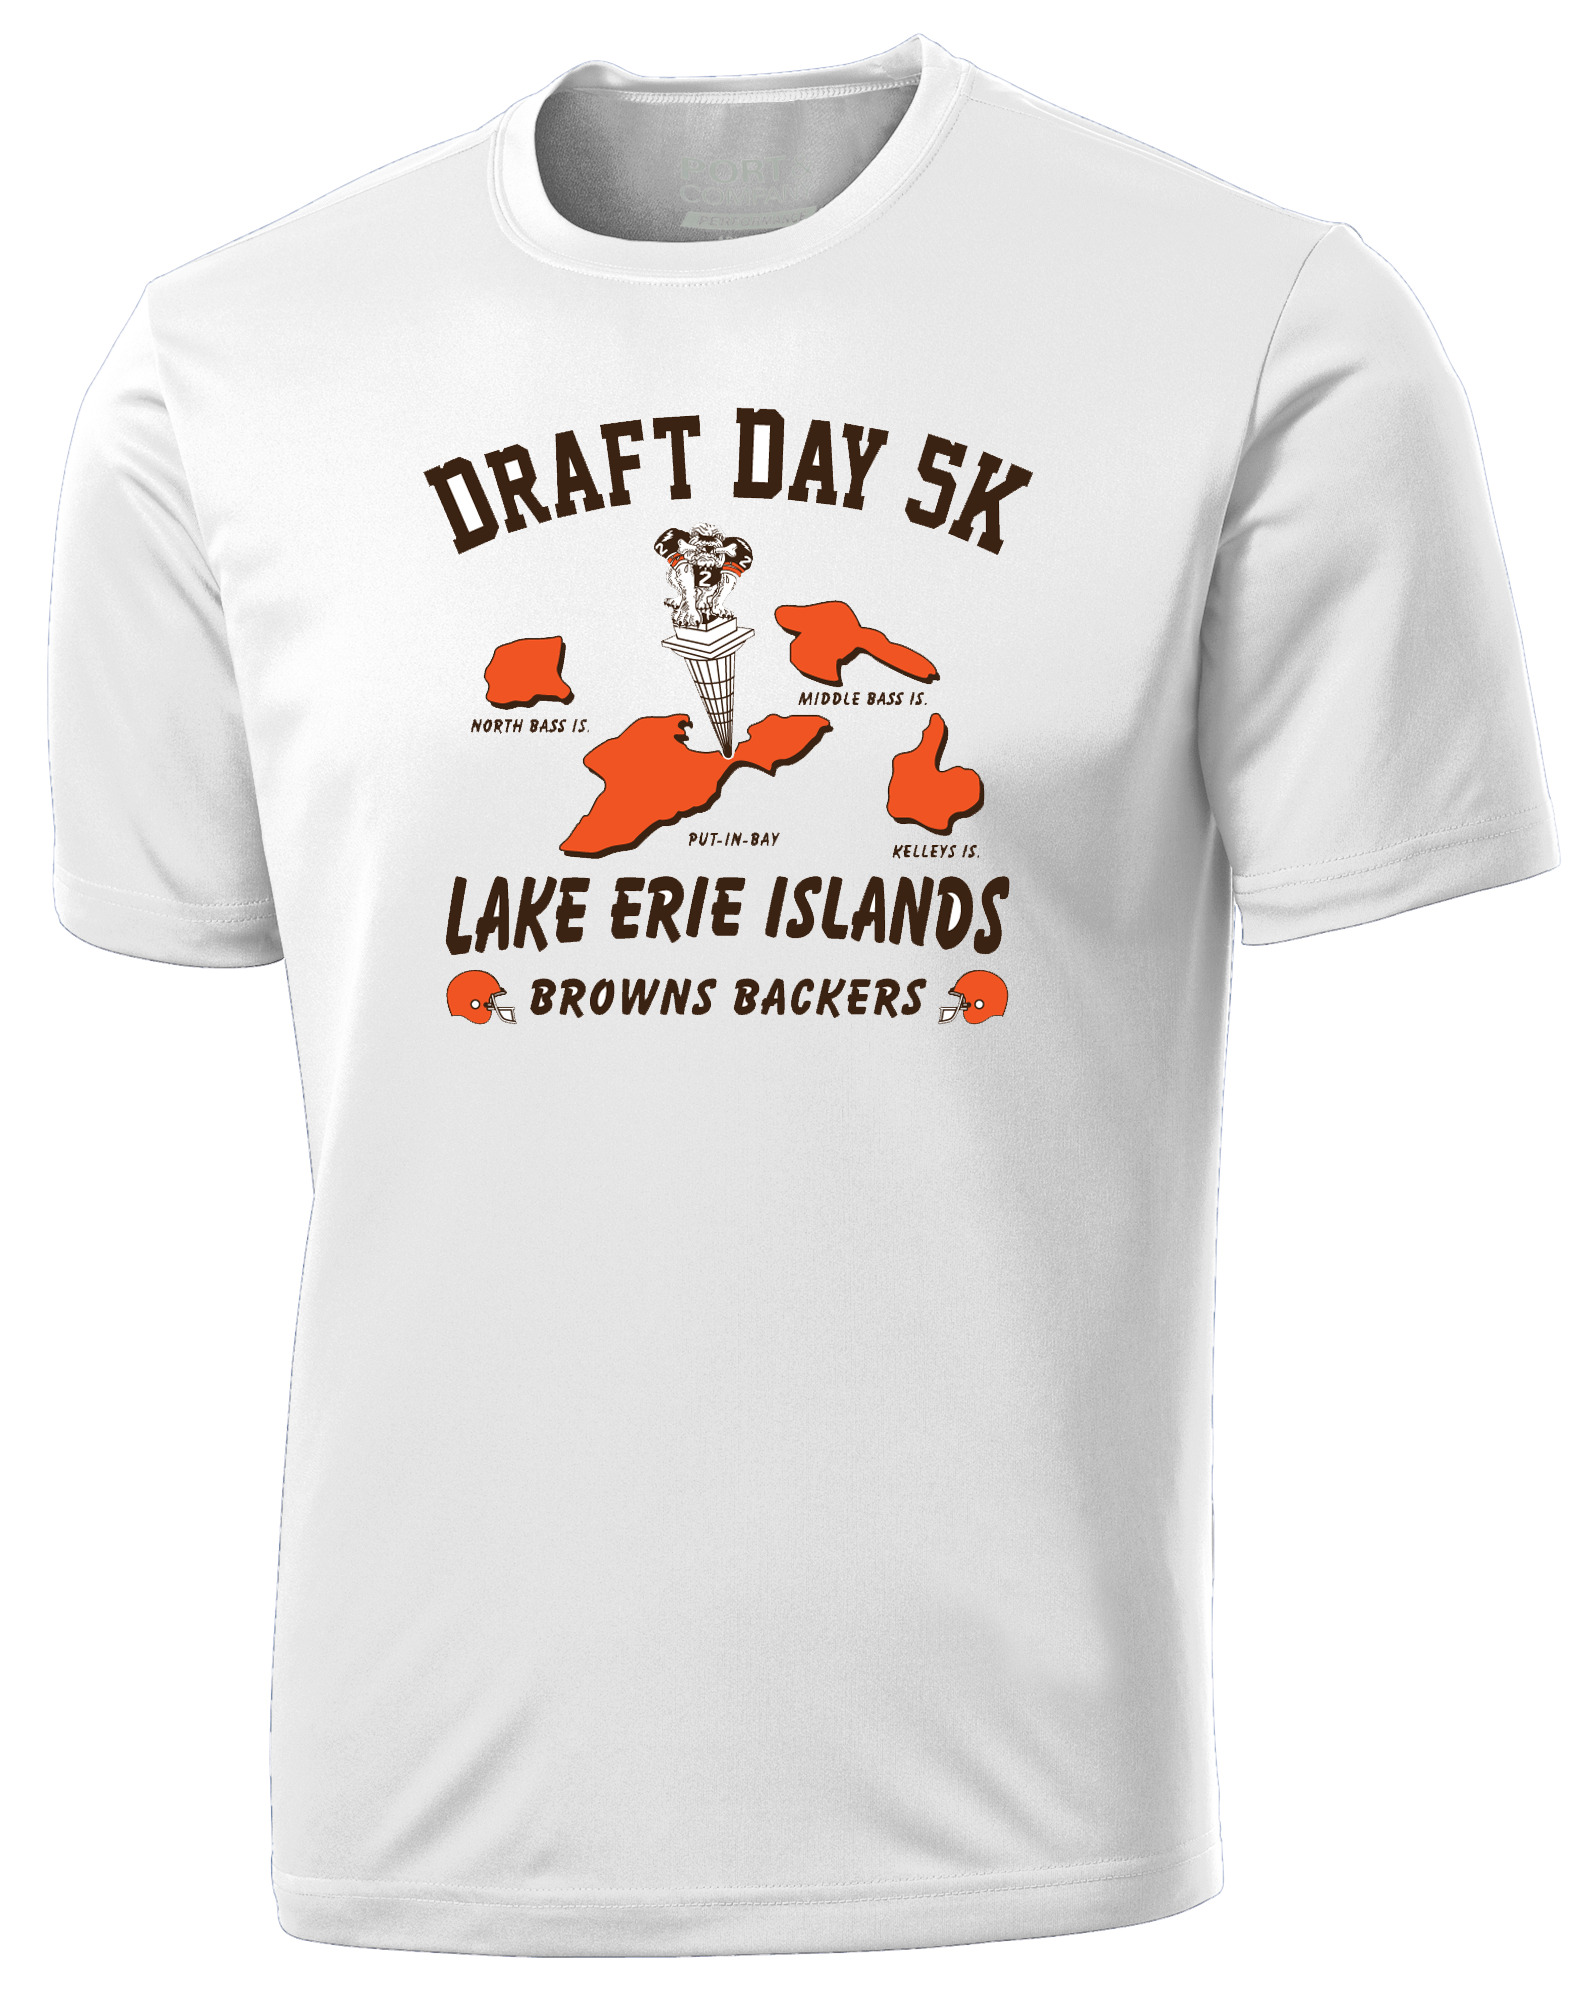 Draft Day 5k at Put-in-Bay Official Race Tech T-Shirt - Lake Erie Islands Browns Backers - Cleveland Browns Shirt - Dawg Pound Shirt - USA Race Timing and Event Management